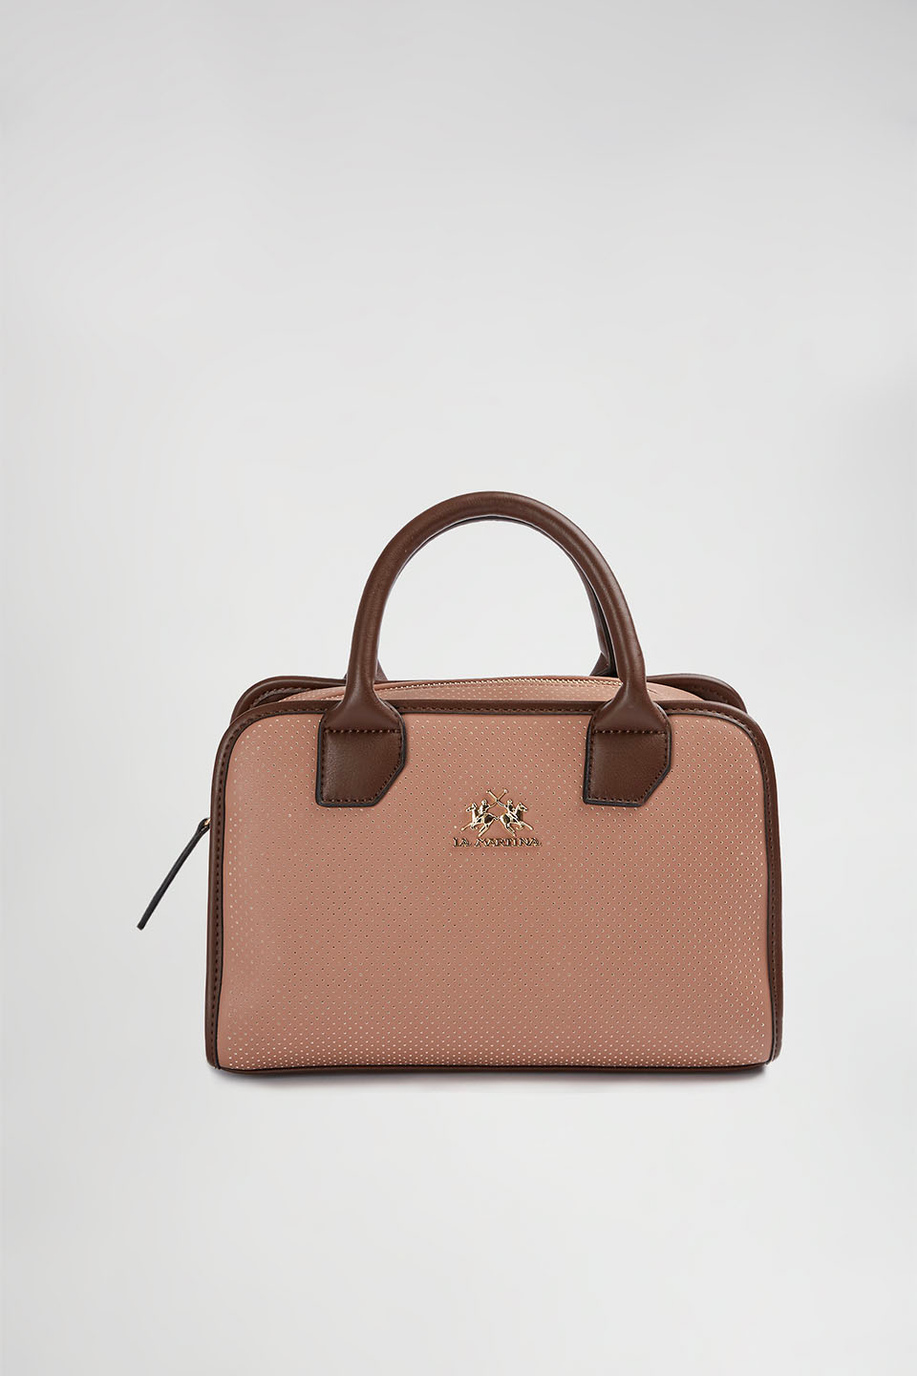 PU leather bag - New in | La Martina - Official Online Shop